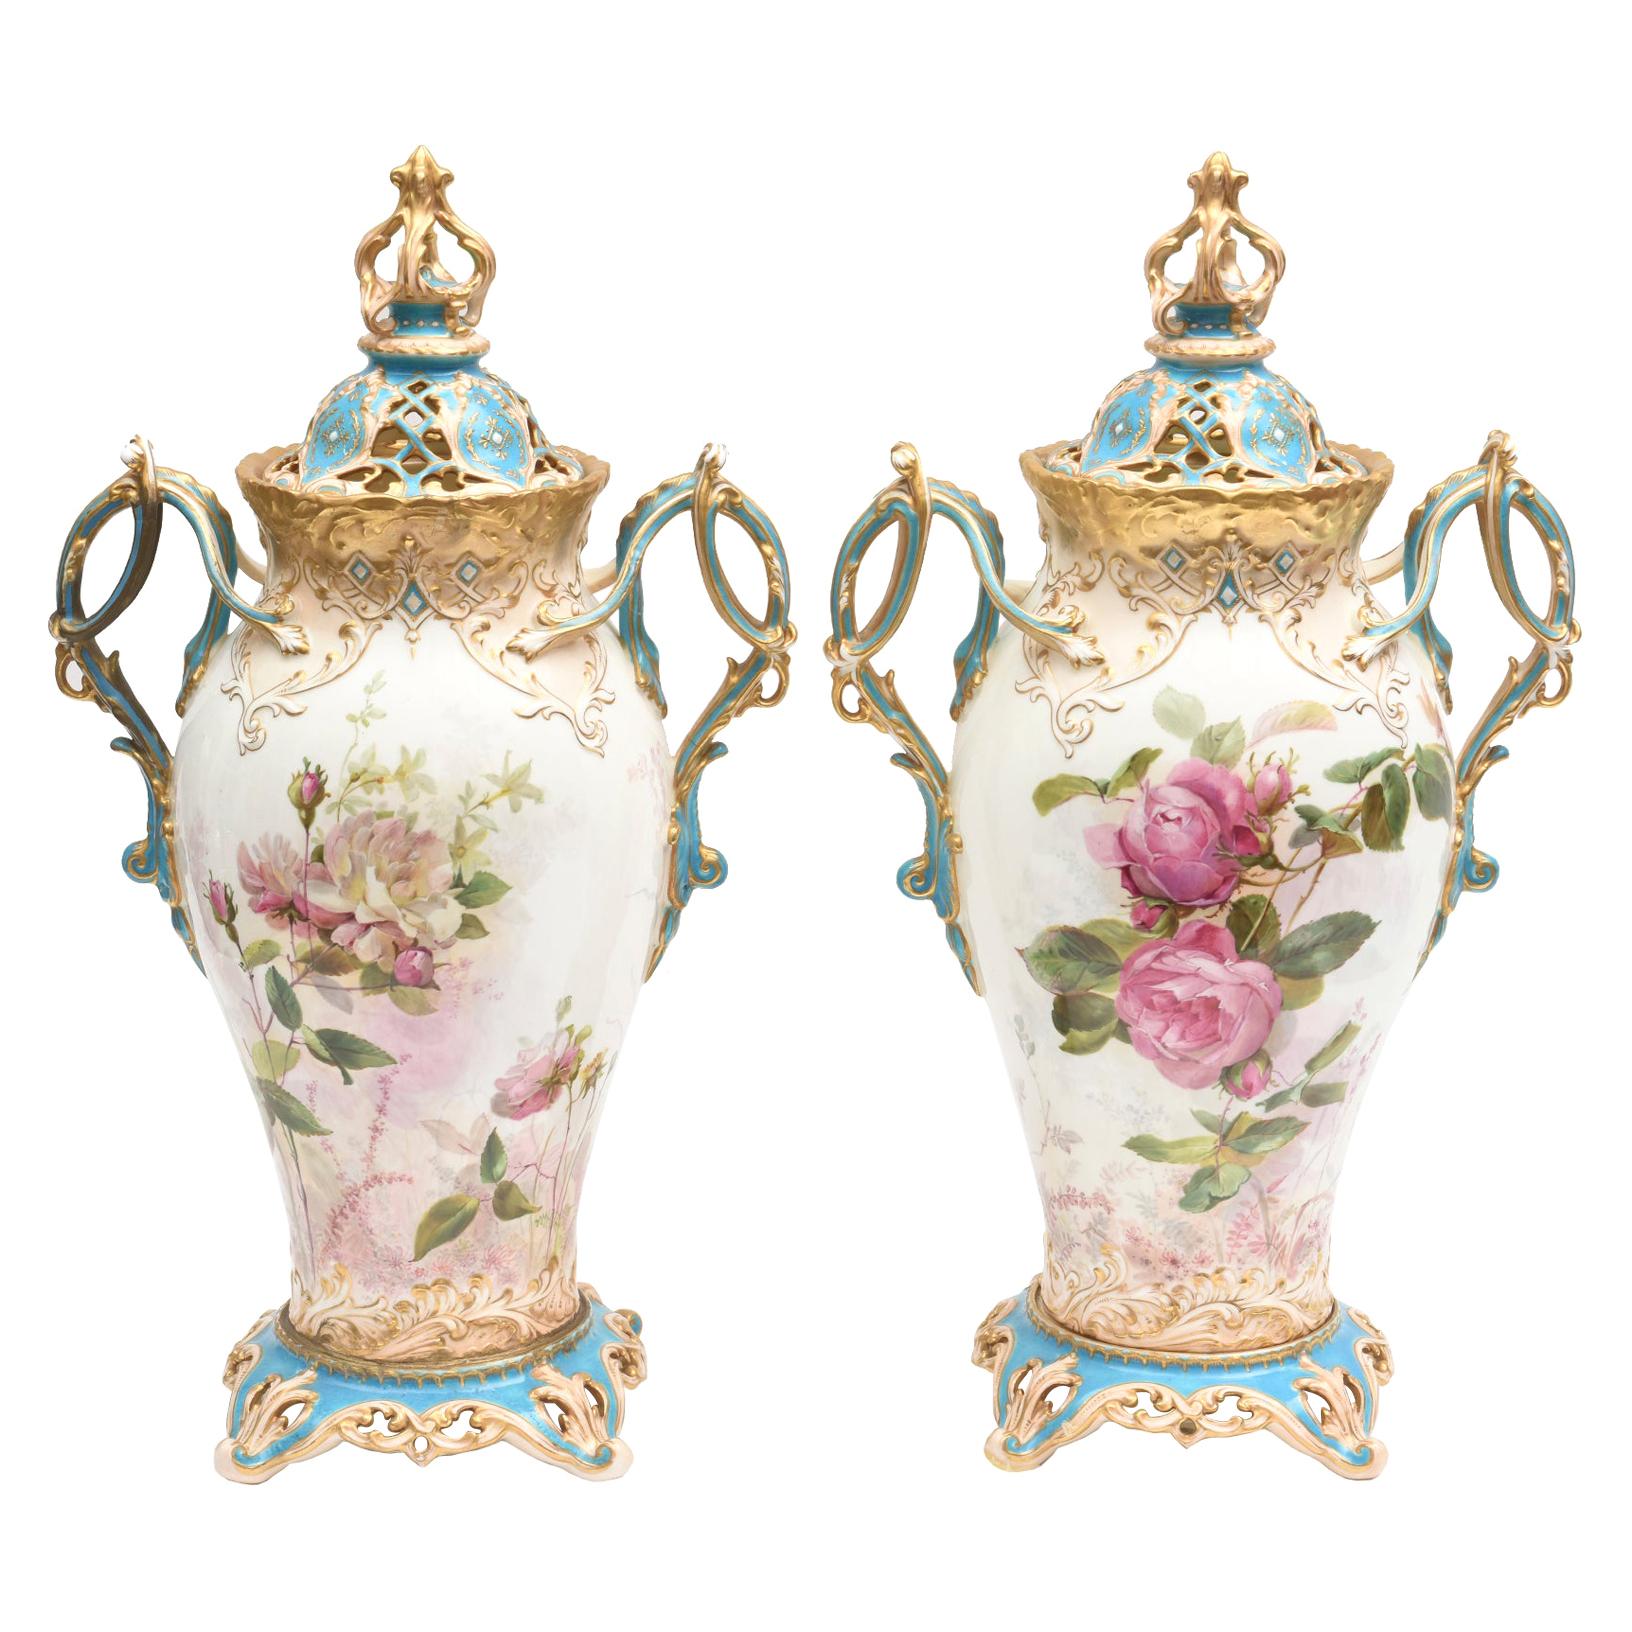 19th Century English Covered Vases, Vibrant Turquoise, Exquisitely Crafted, Pair